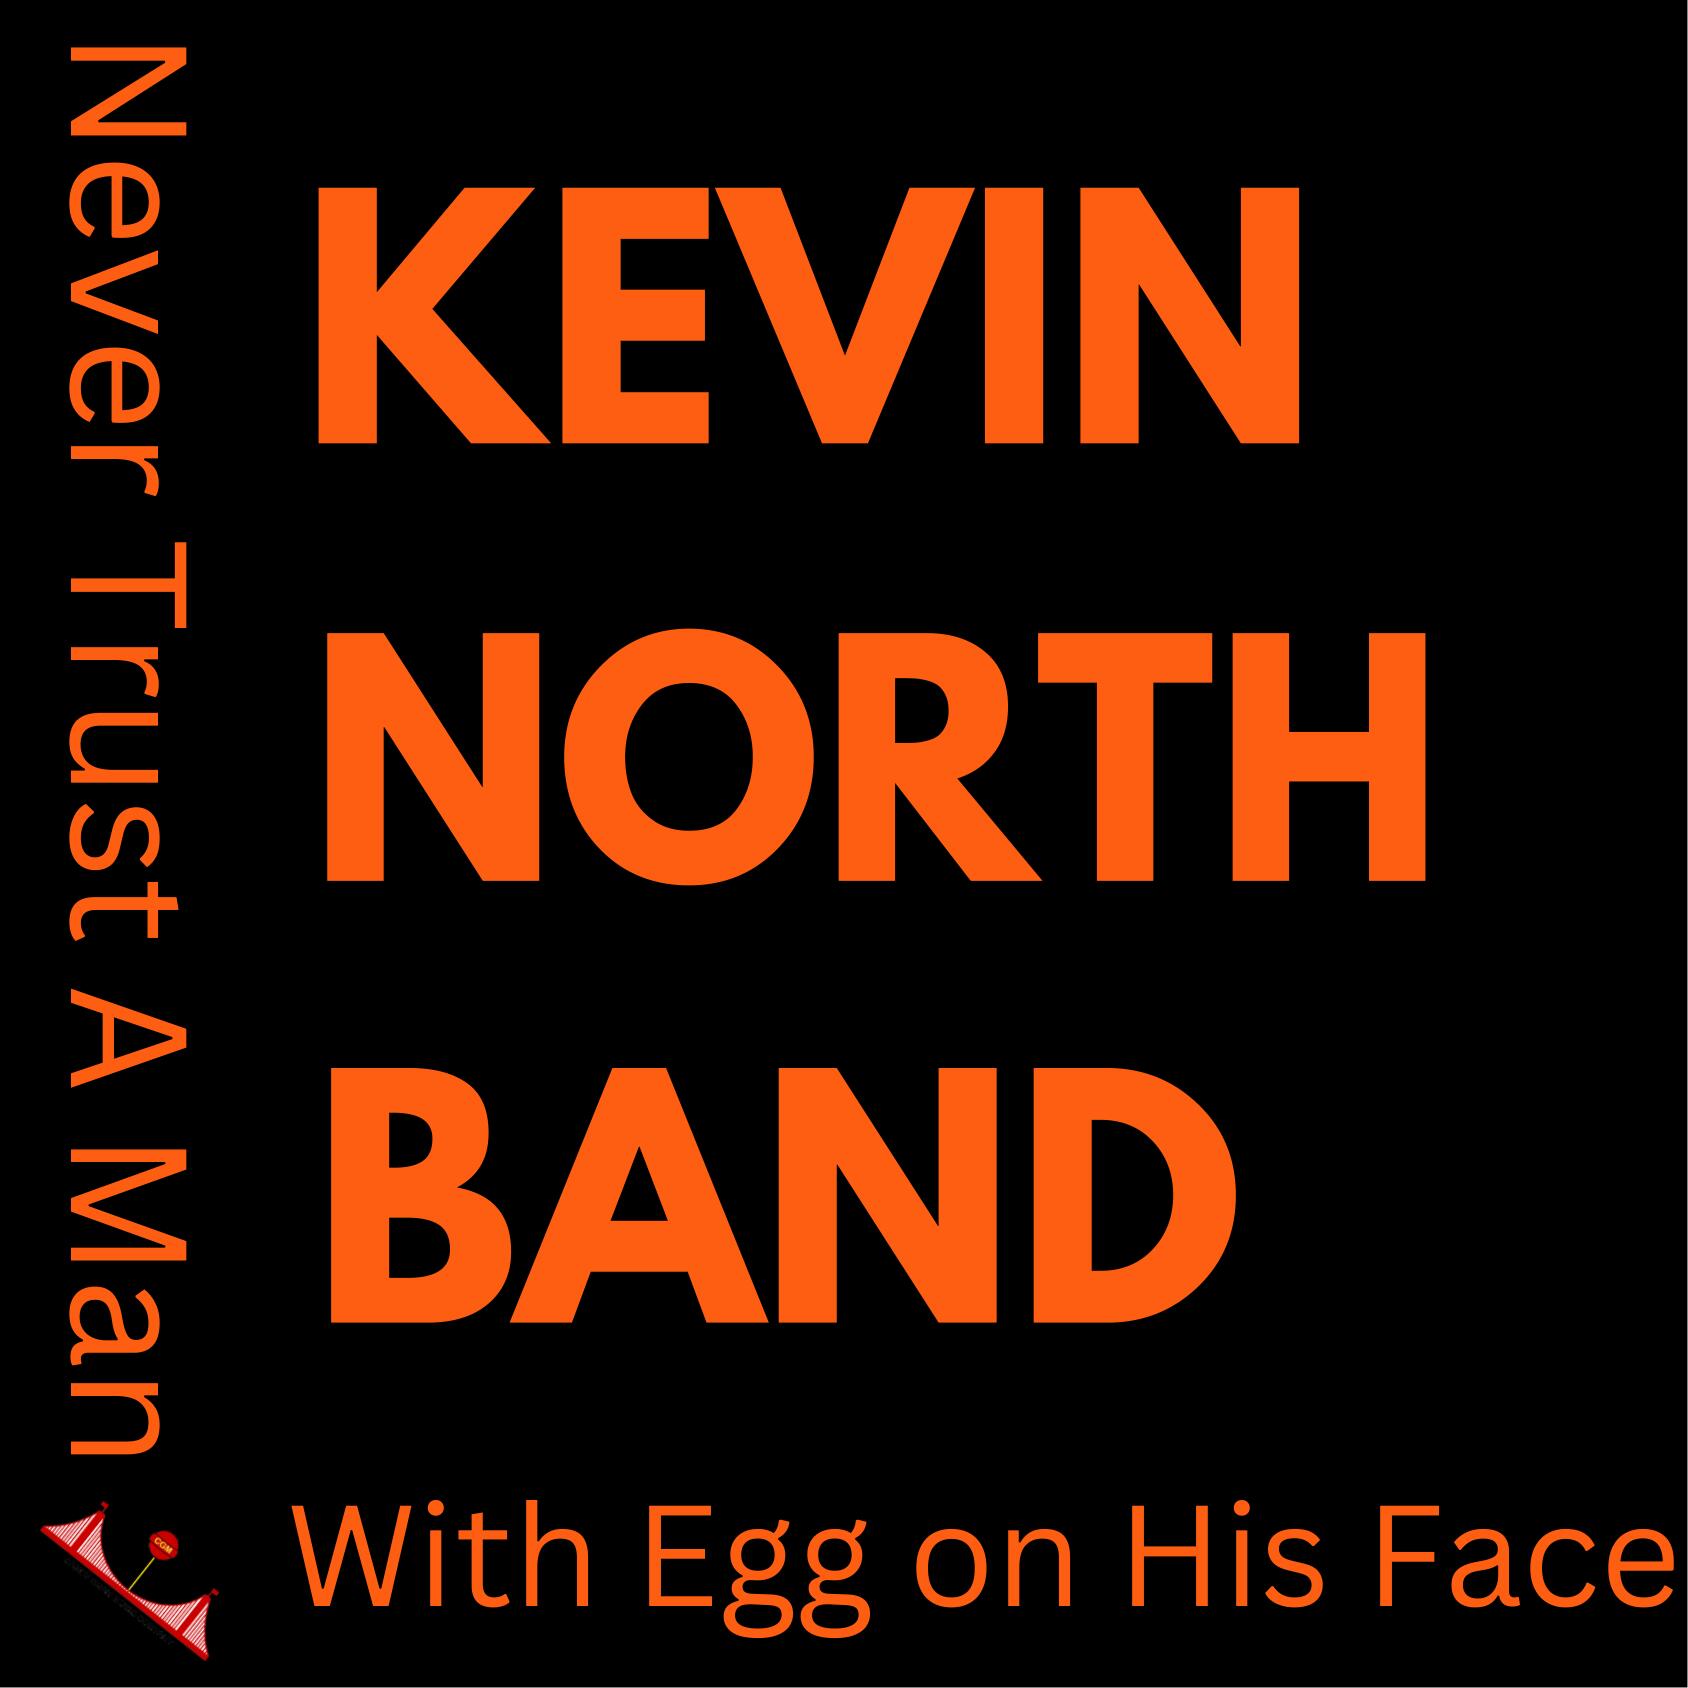 Kevin North Band Releases New Adam Ant Cover Single “Never Trust A Man With Egg On His Face”